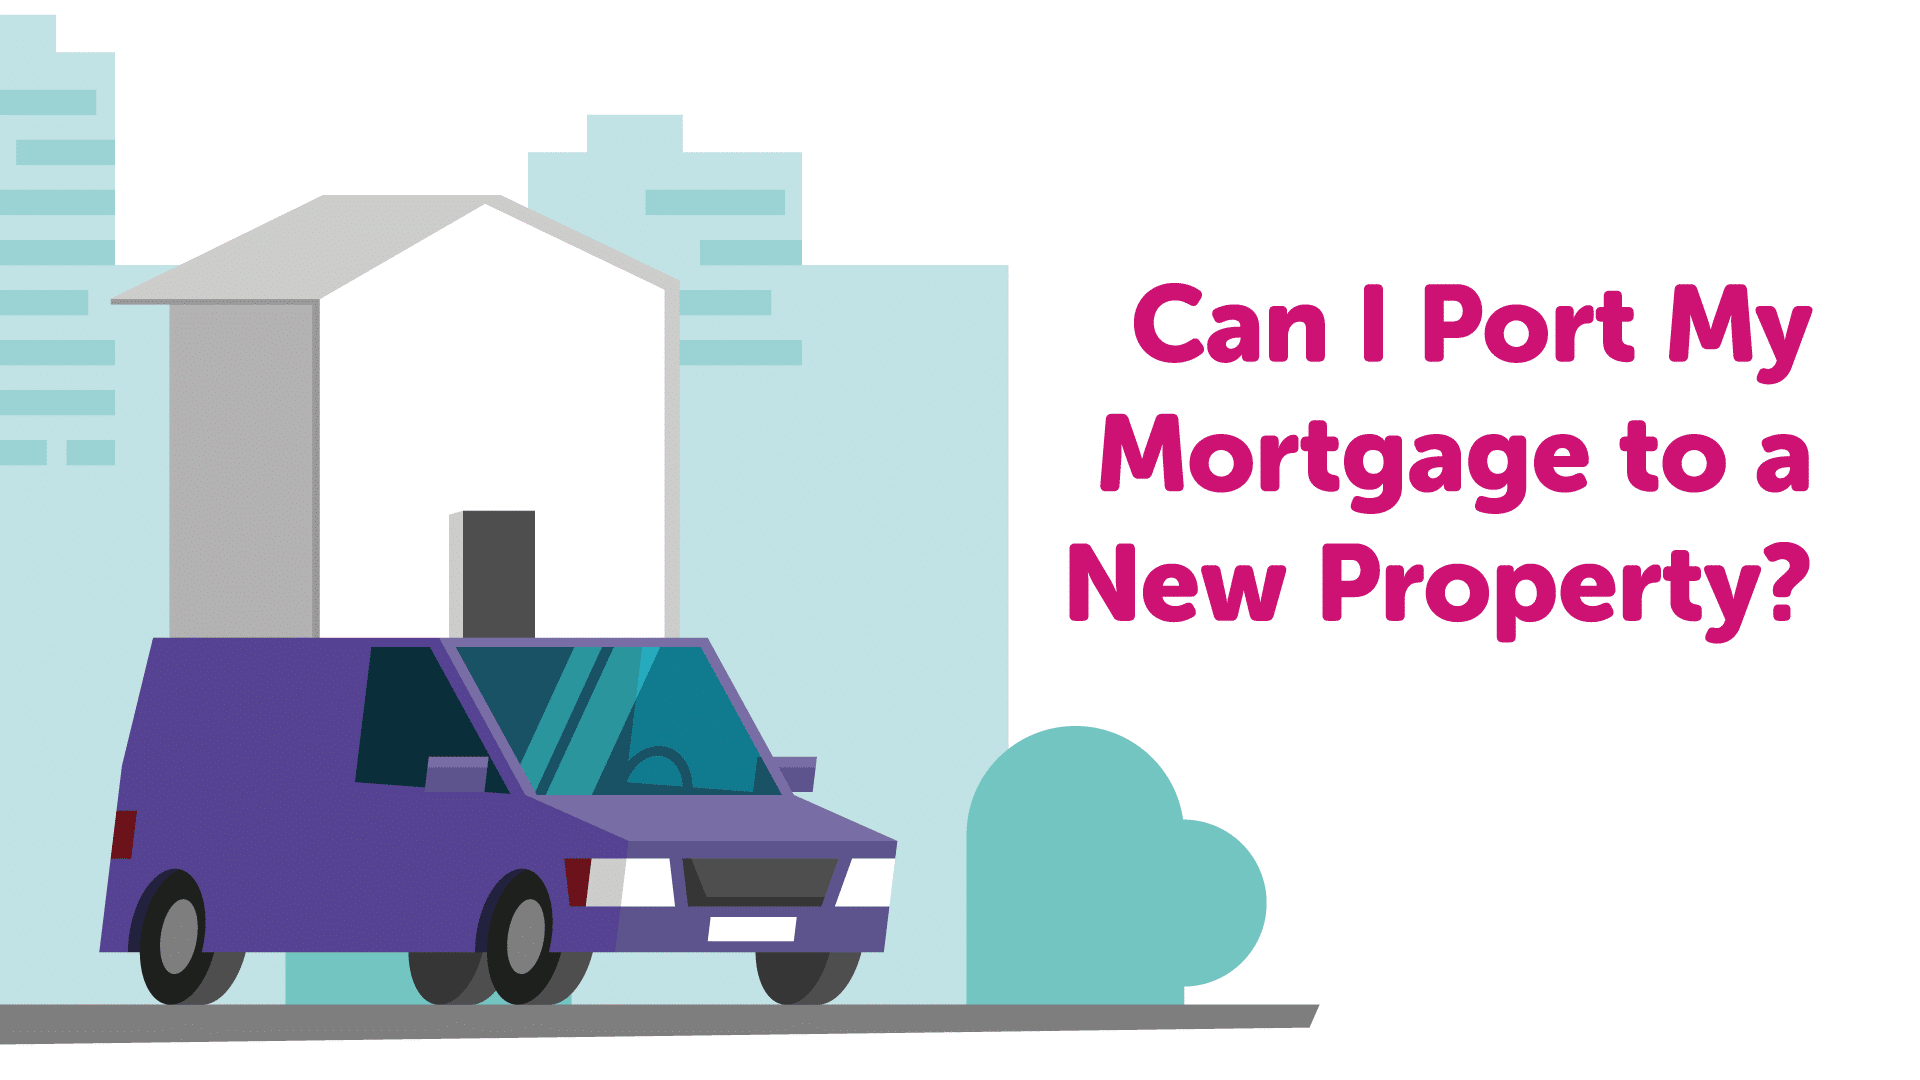 Can I Port My Mortgage to a New Property in Coventry?